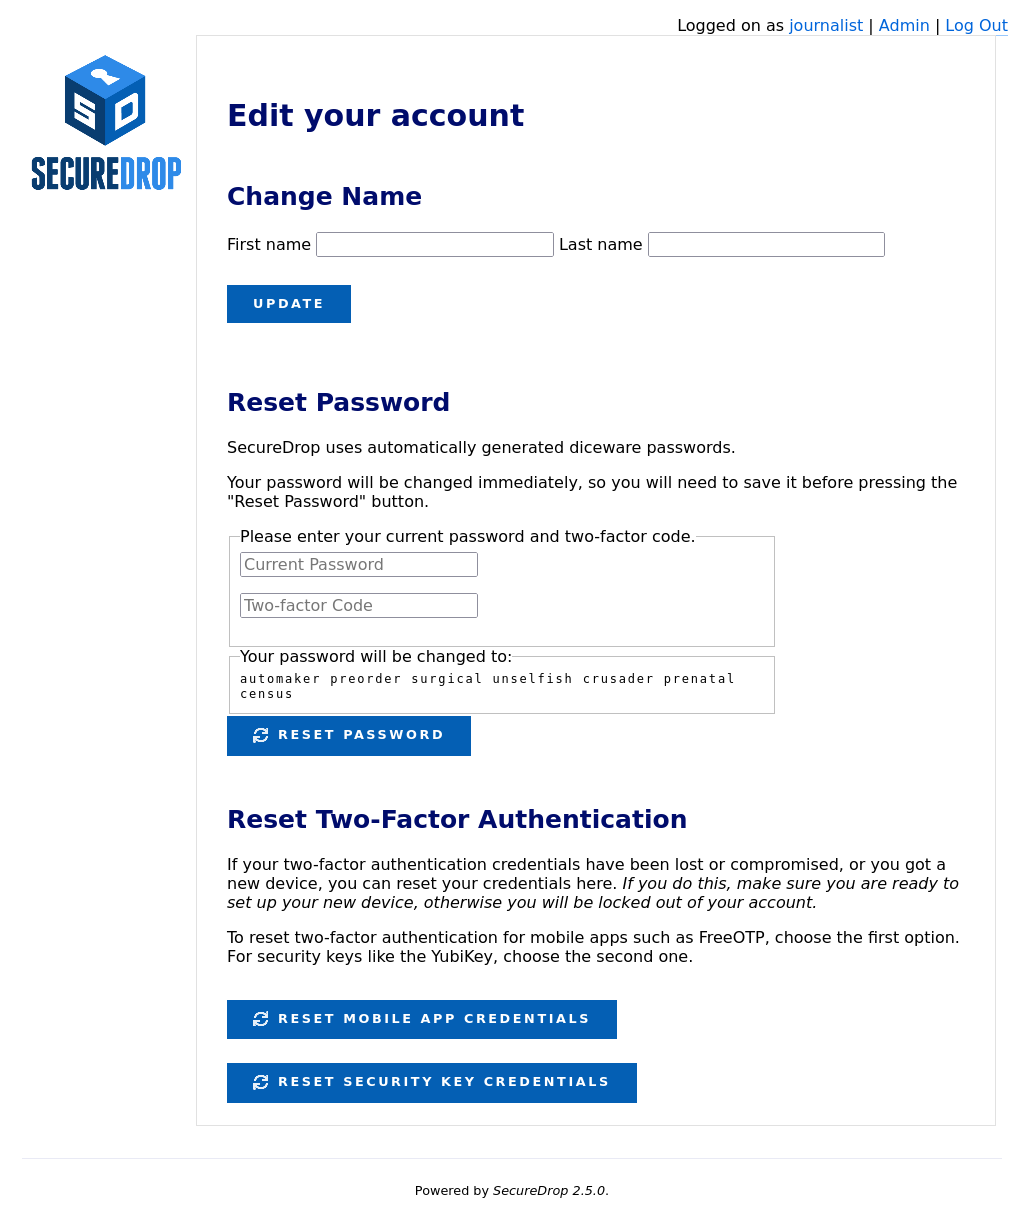 The account editing form allows admins to change name, reset passphrase, and reset two-factor authentication.